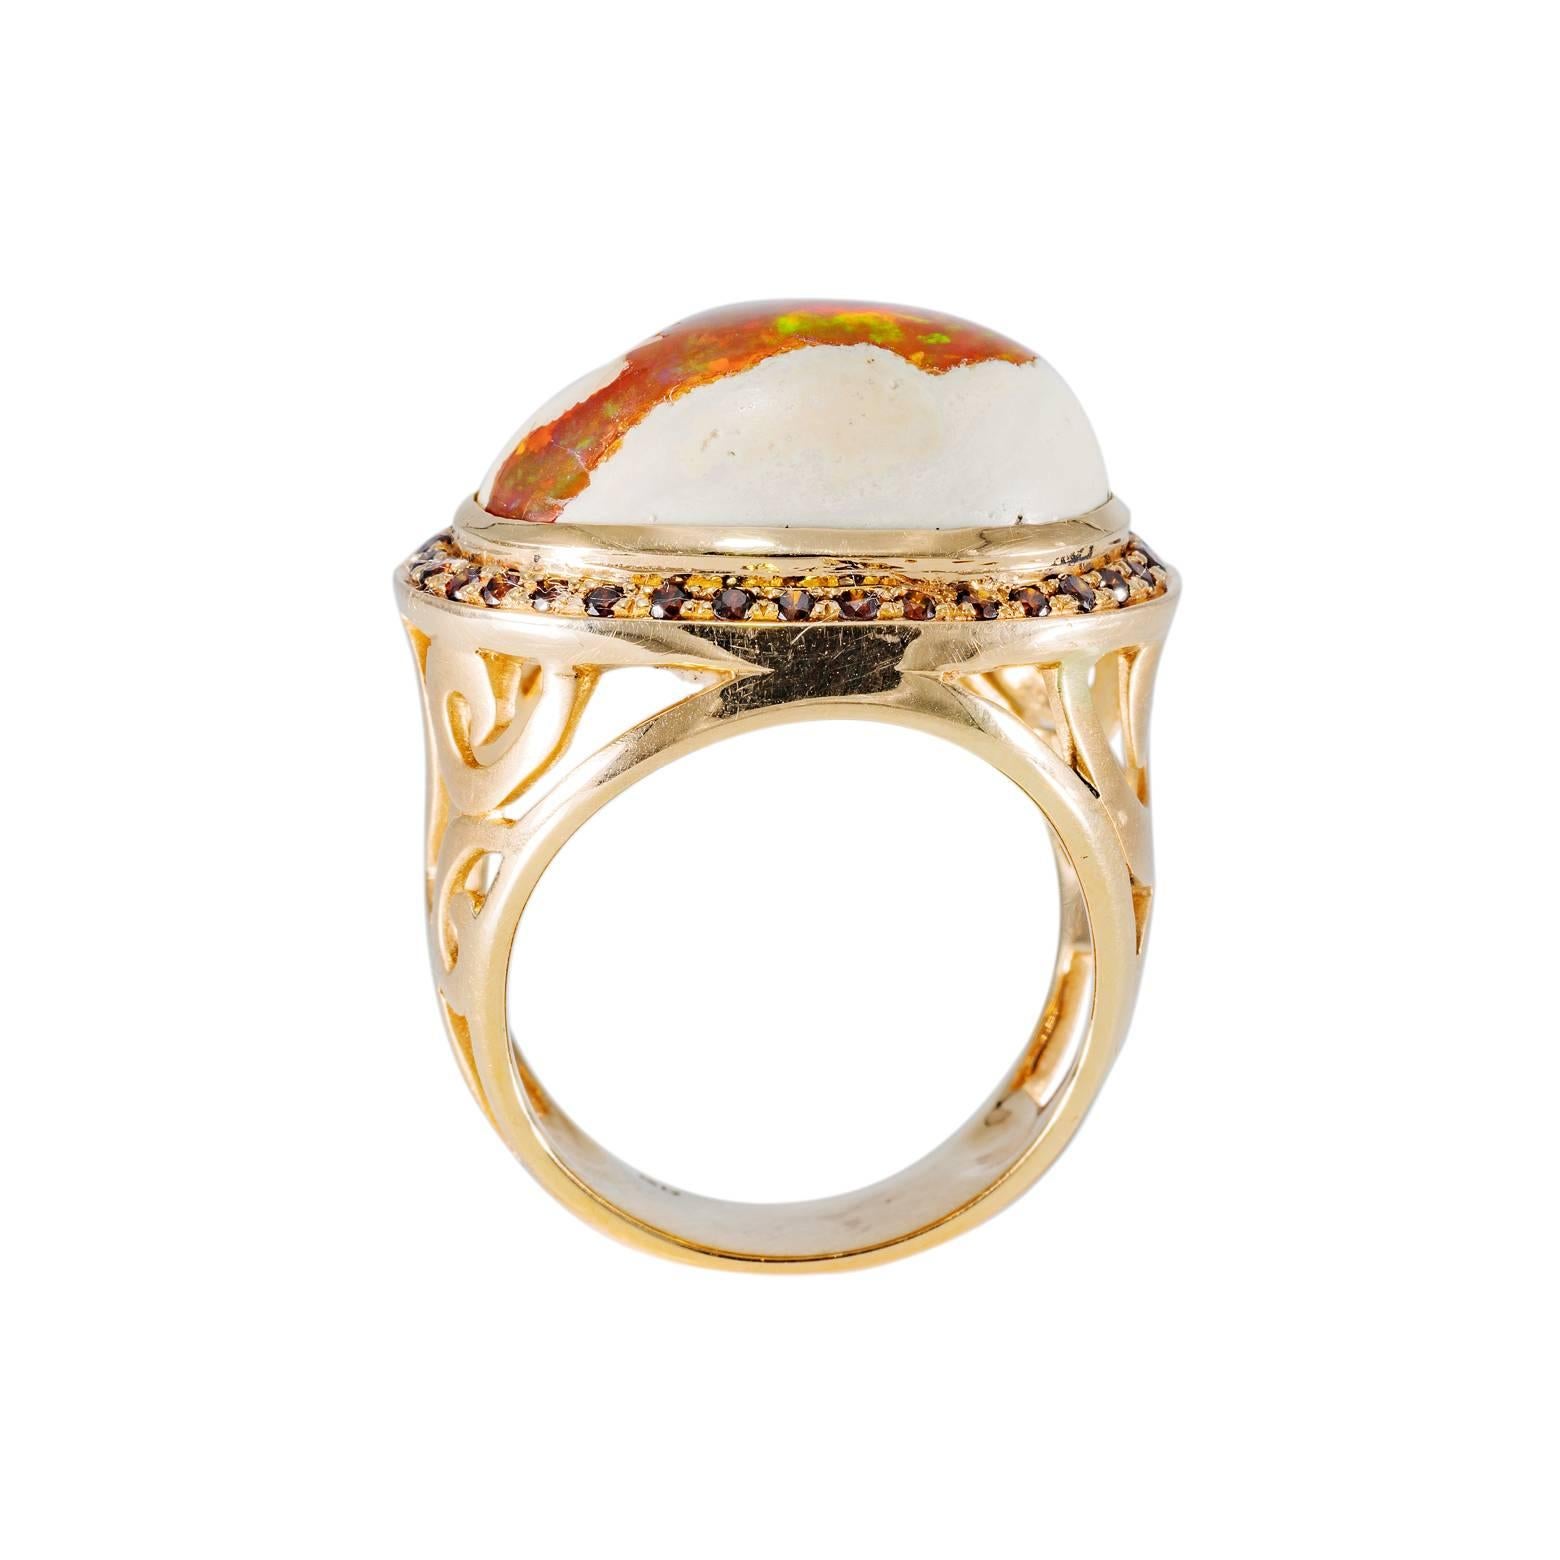 This stunning fire opal is beautifully surrounded by burnt orange diamonds. The base of the ring is intricately carved  and even though it is a hefty ring it is surprisingly comfortable. The opal is aprox. 10 1/2 carats  and the ring is a size 8.